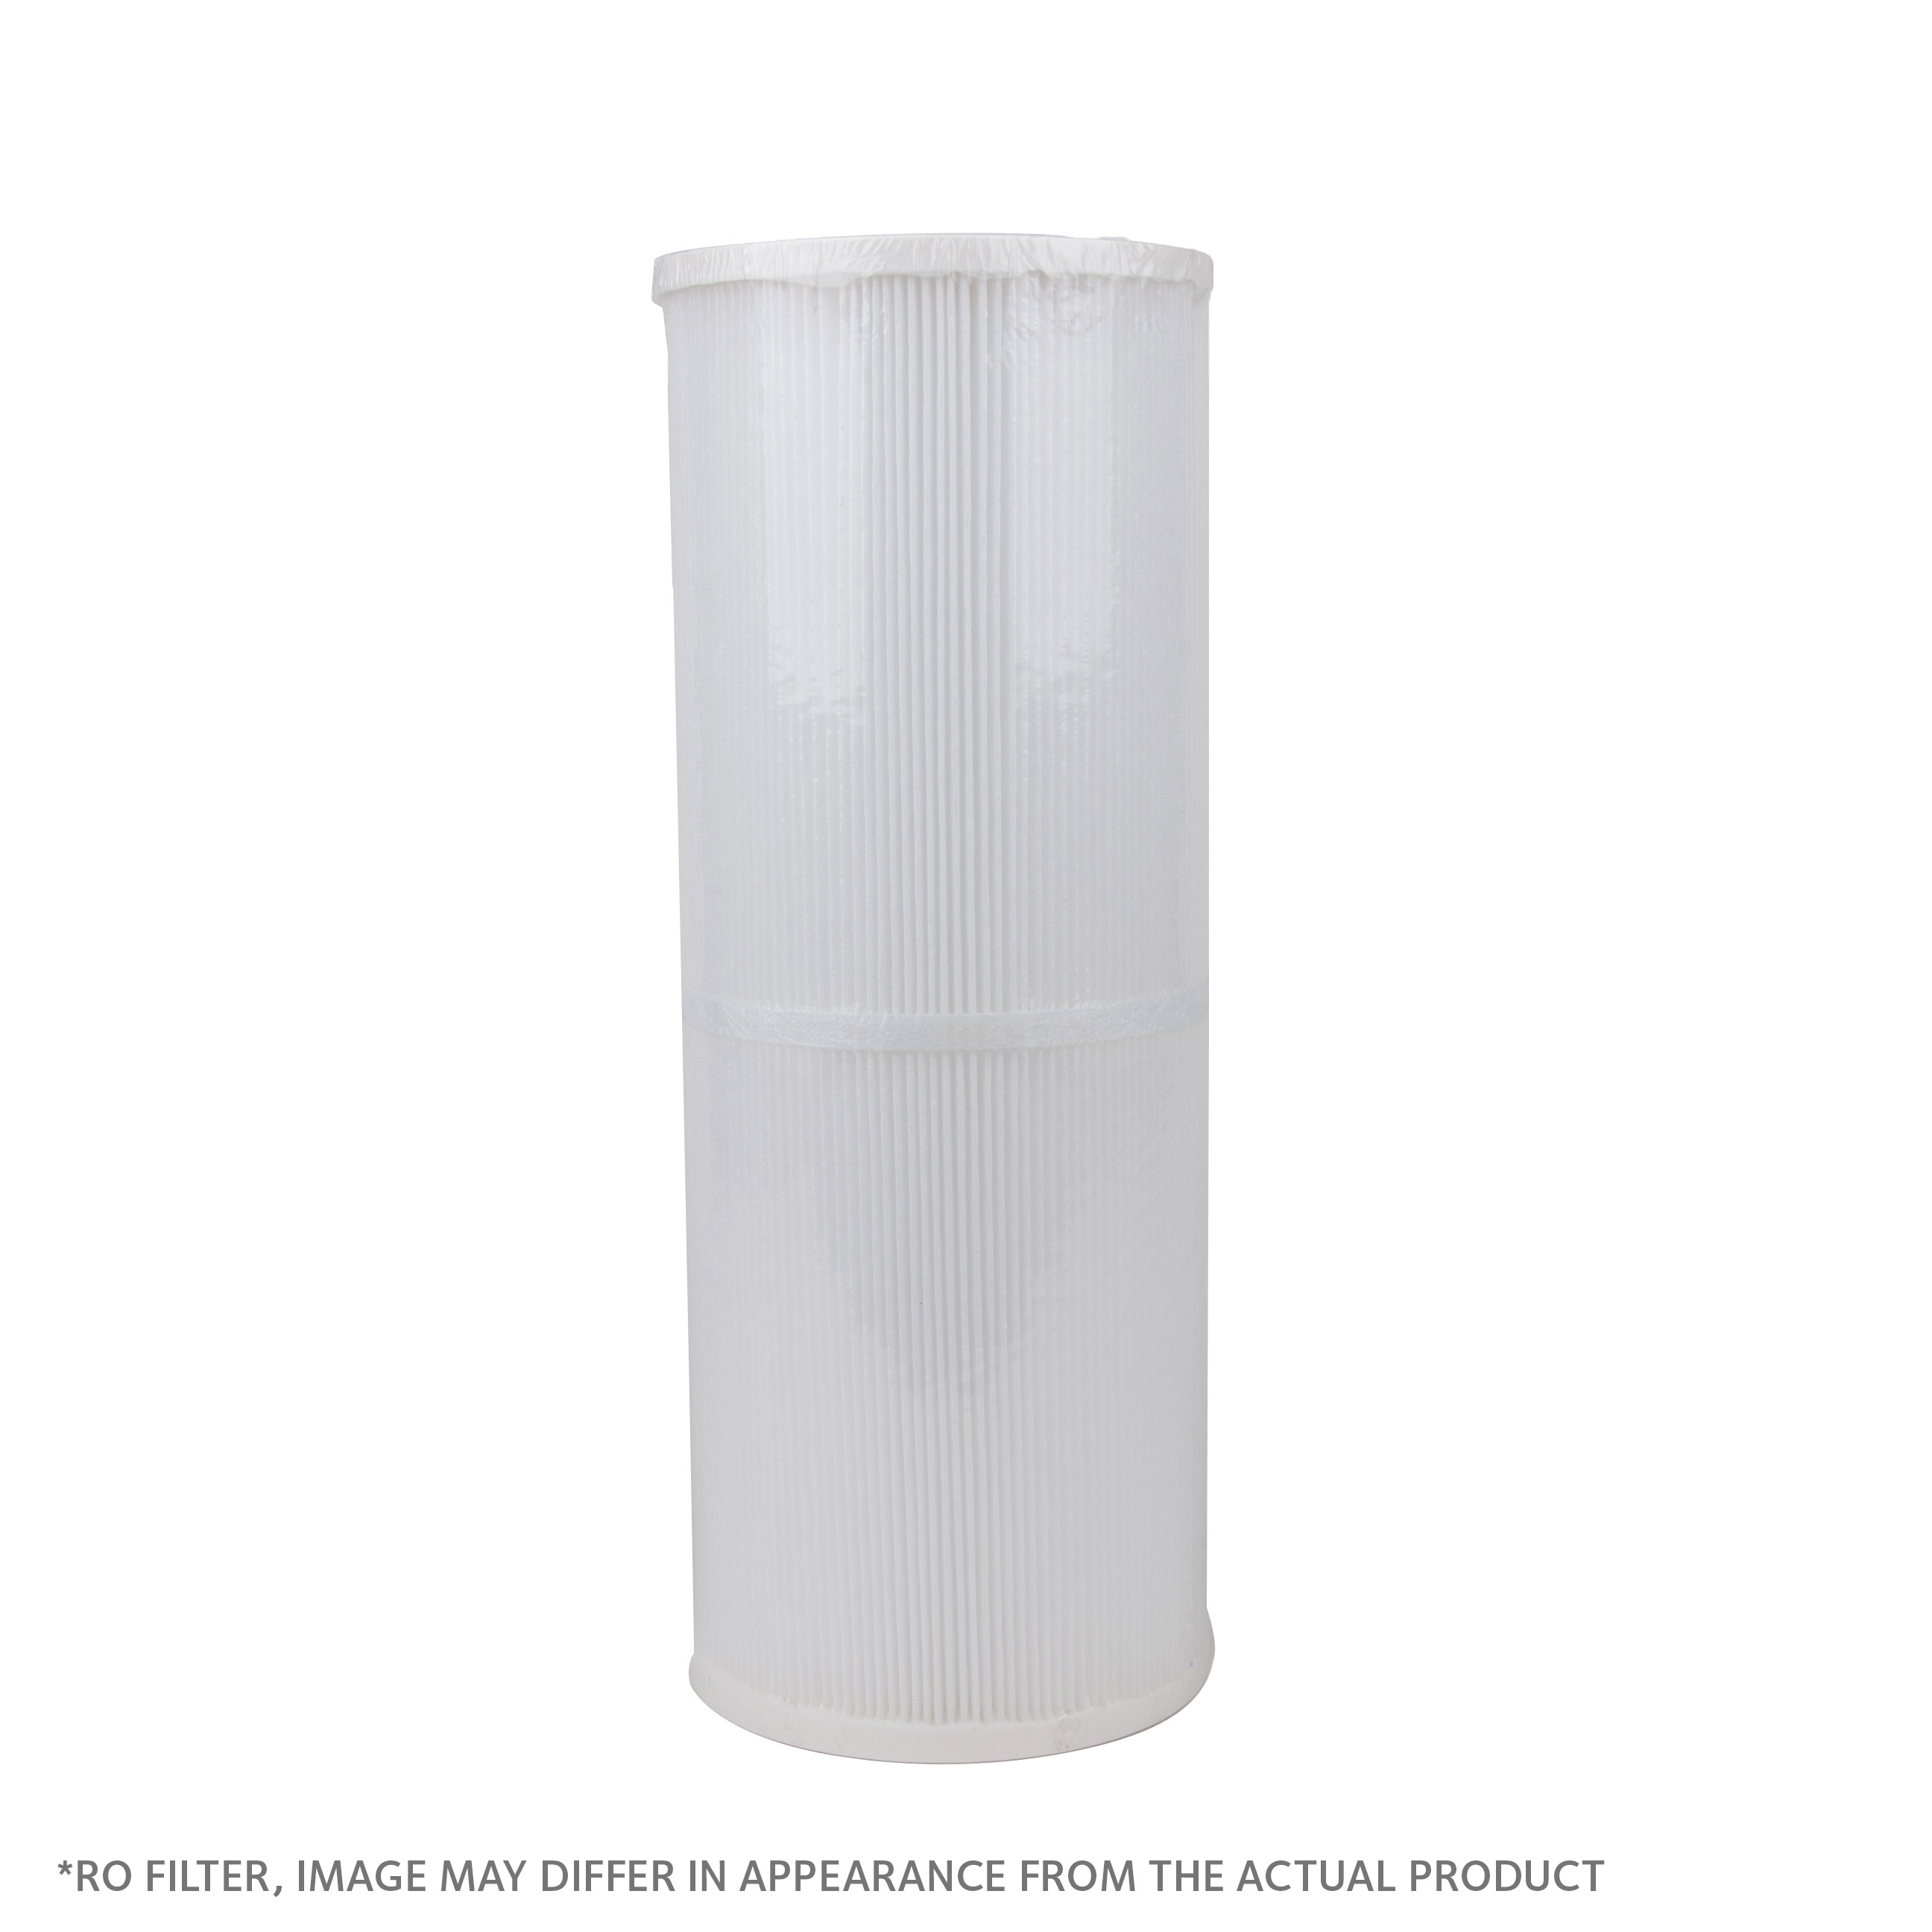 821022057 Filter, Pleated, 10 MIC, 12.0&quot; LG